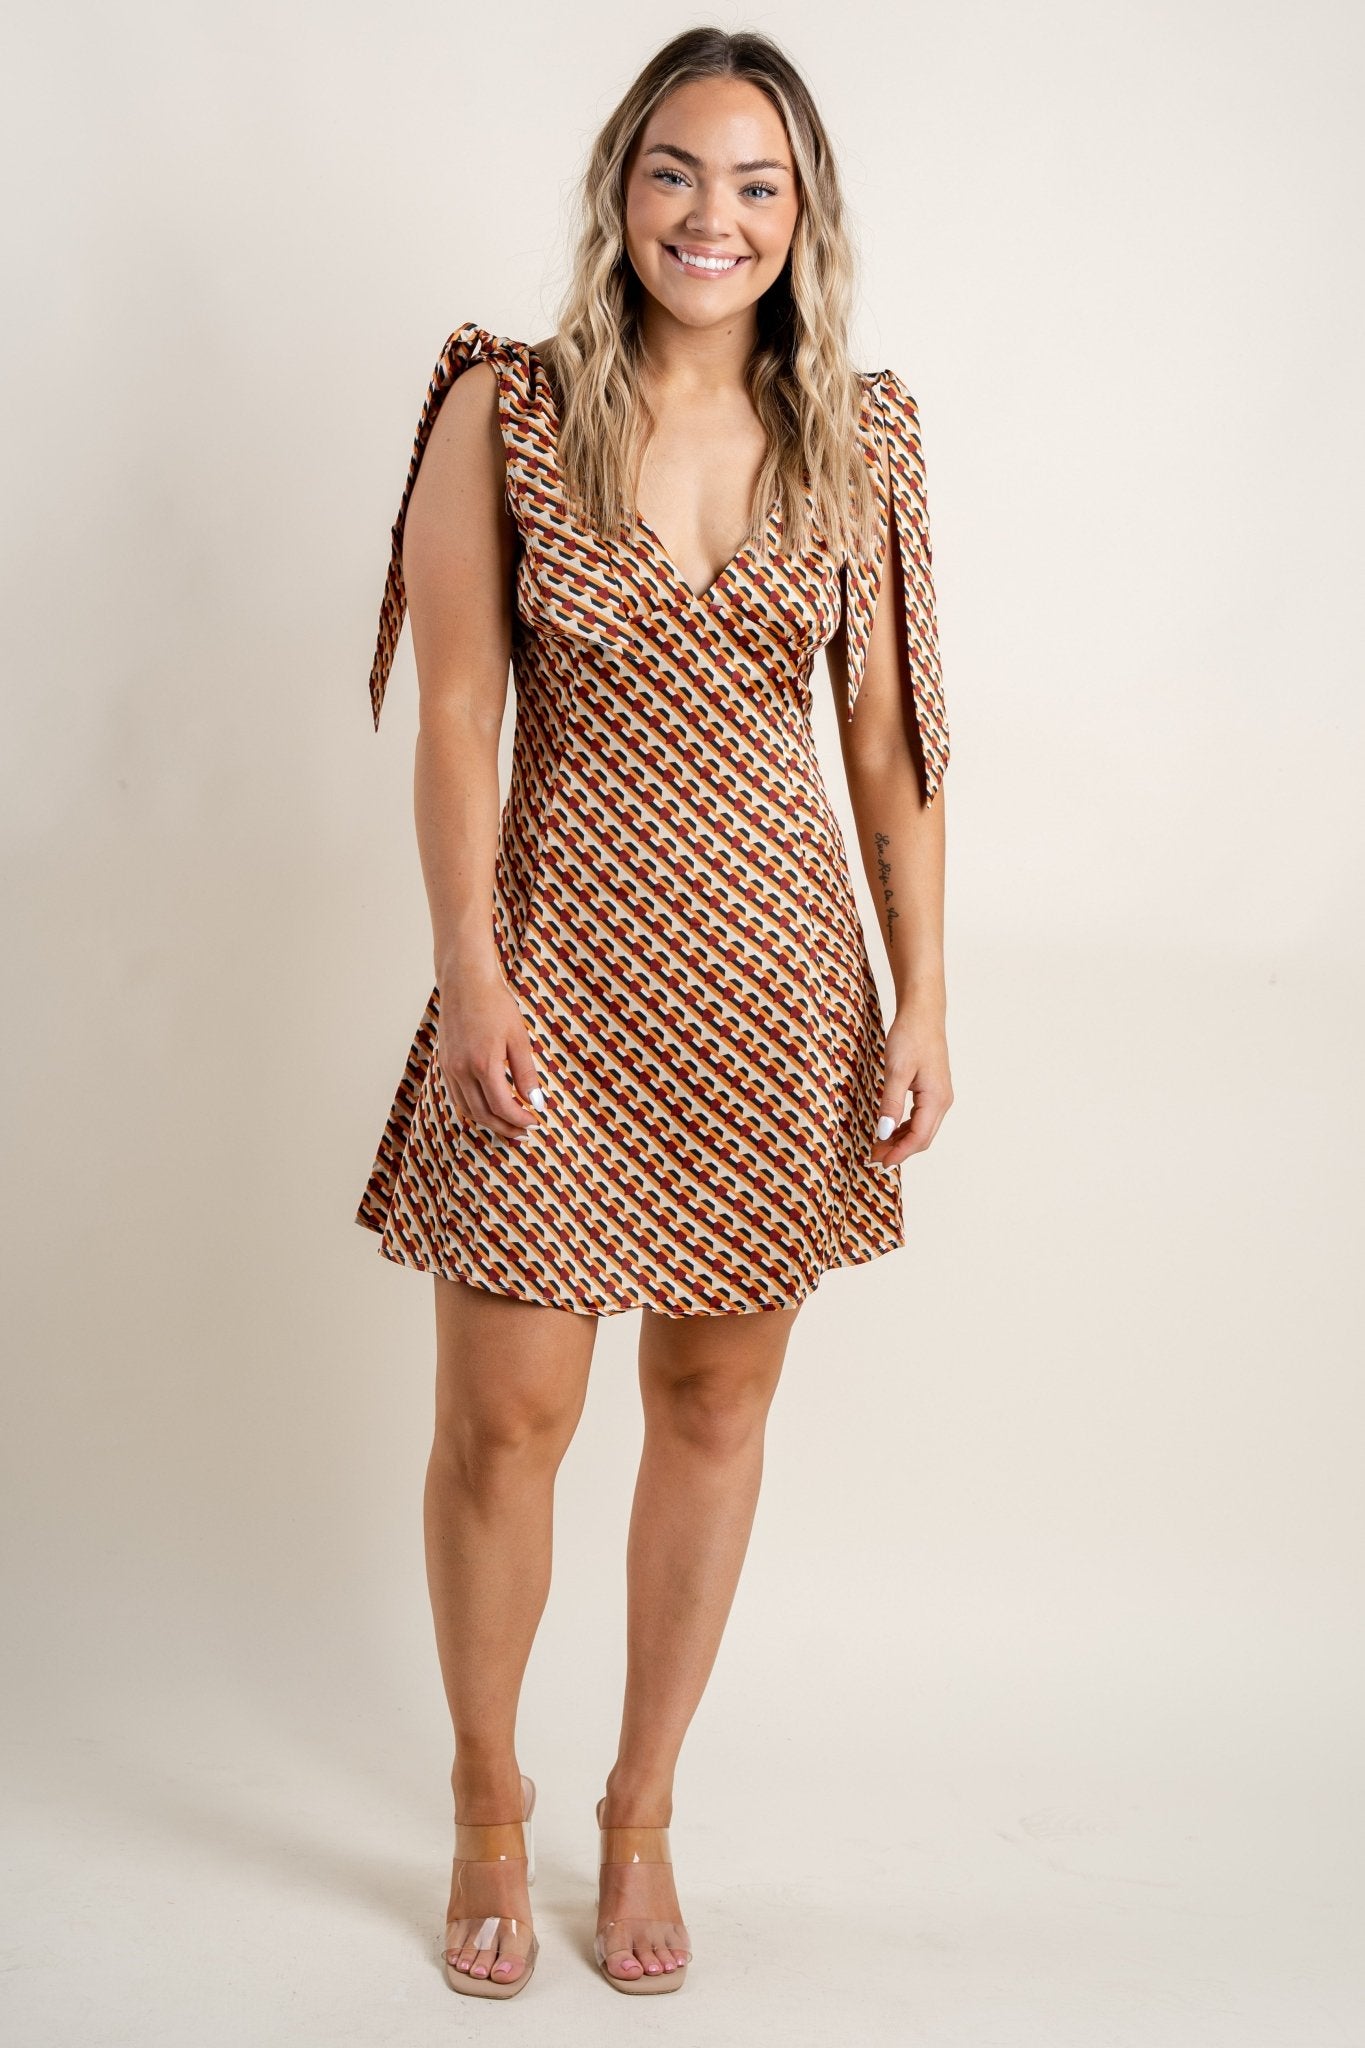 Shoulder tie dress rust Stylish Dresses - Womens Fashion Dresses at Lush Fashion Lounge Boutique in Oklahoma City